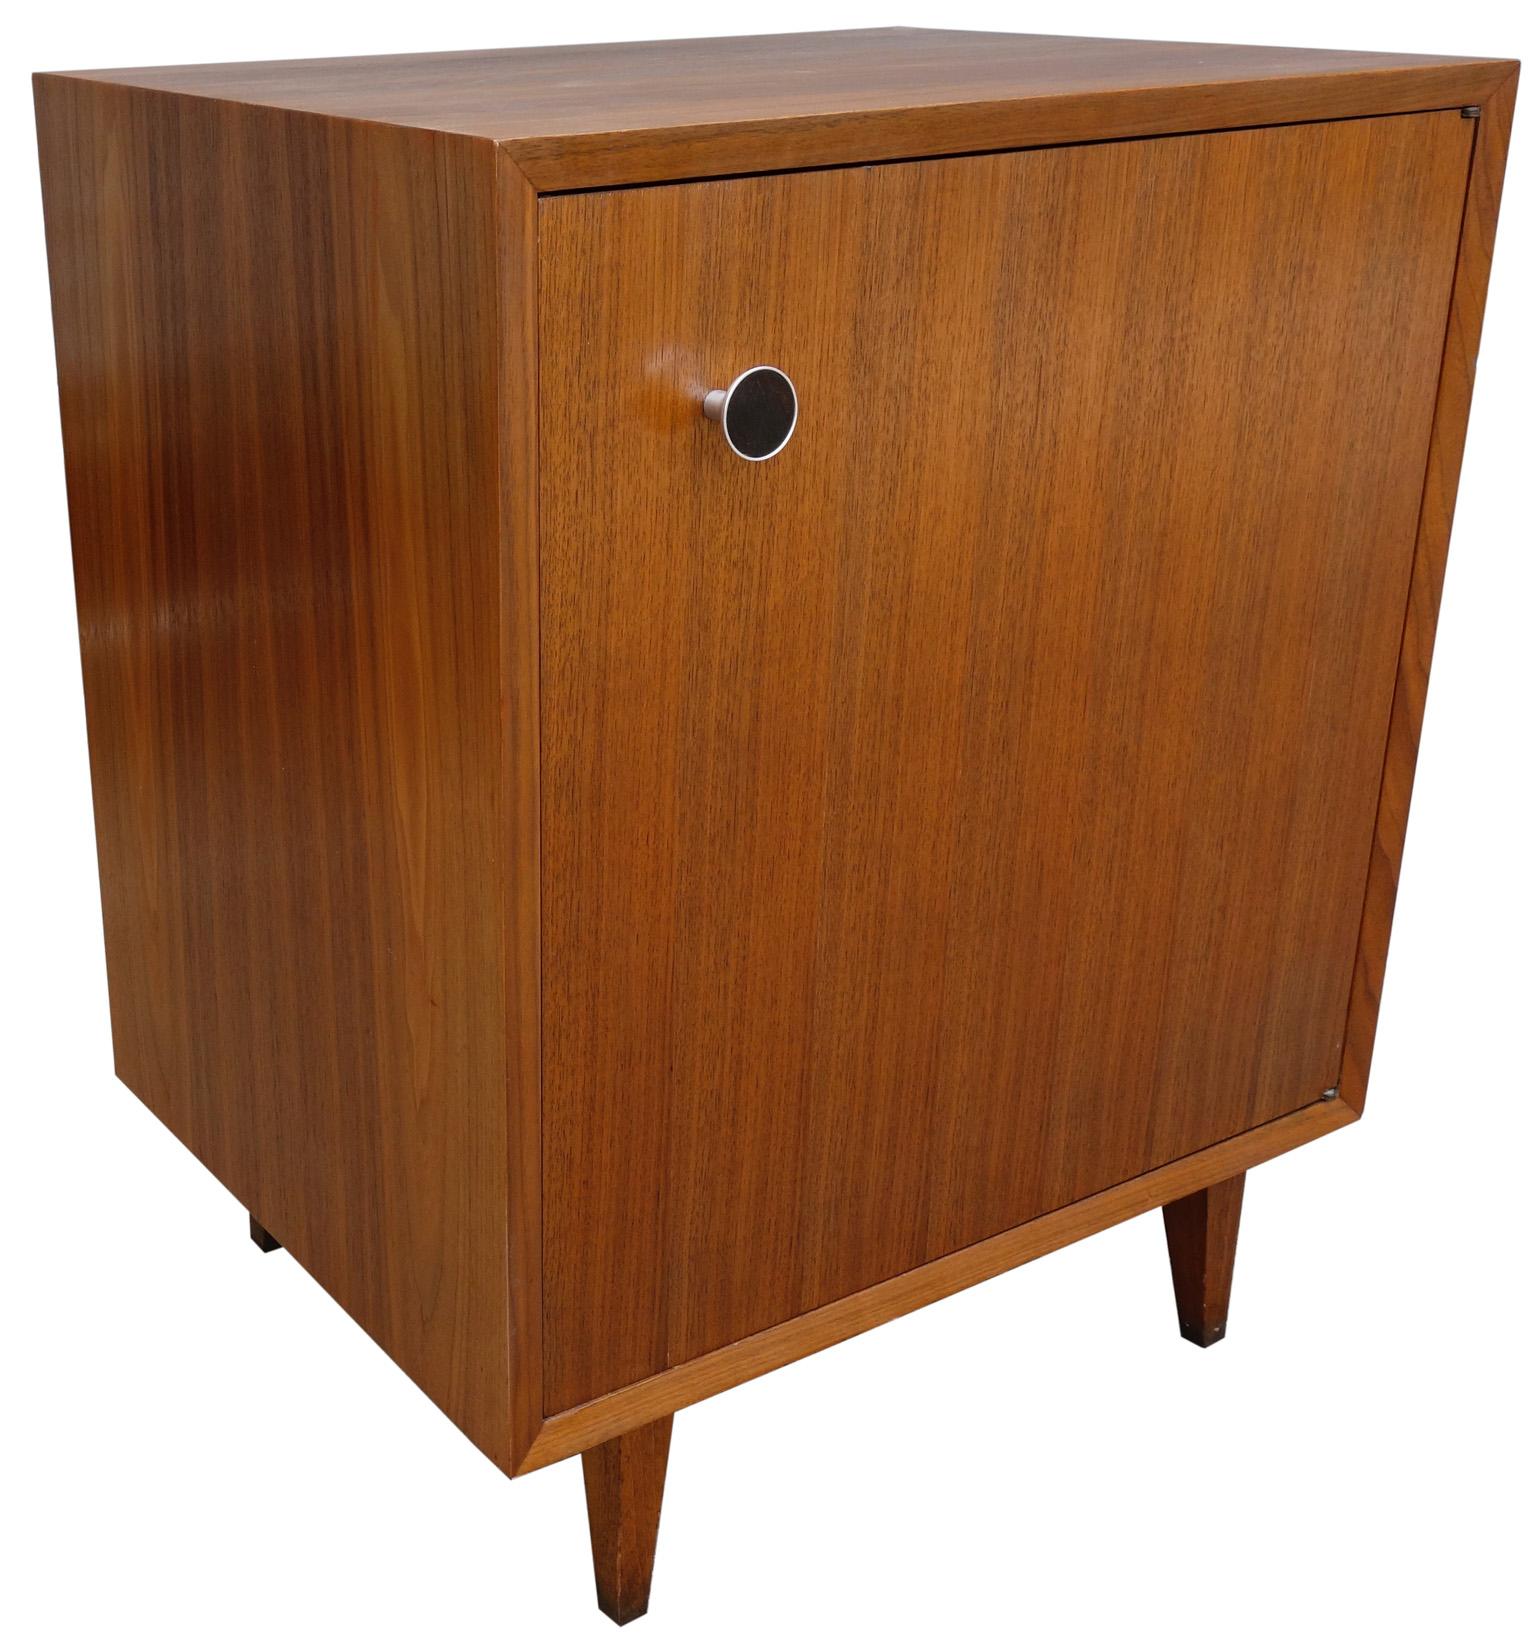 American Midcentury Cabinet by George Nelson for Herman Miller